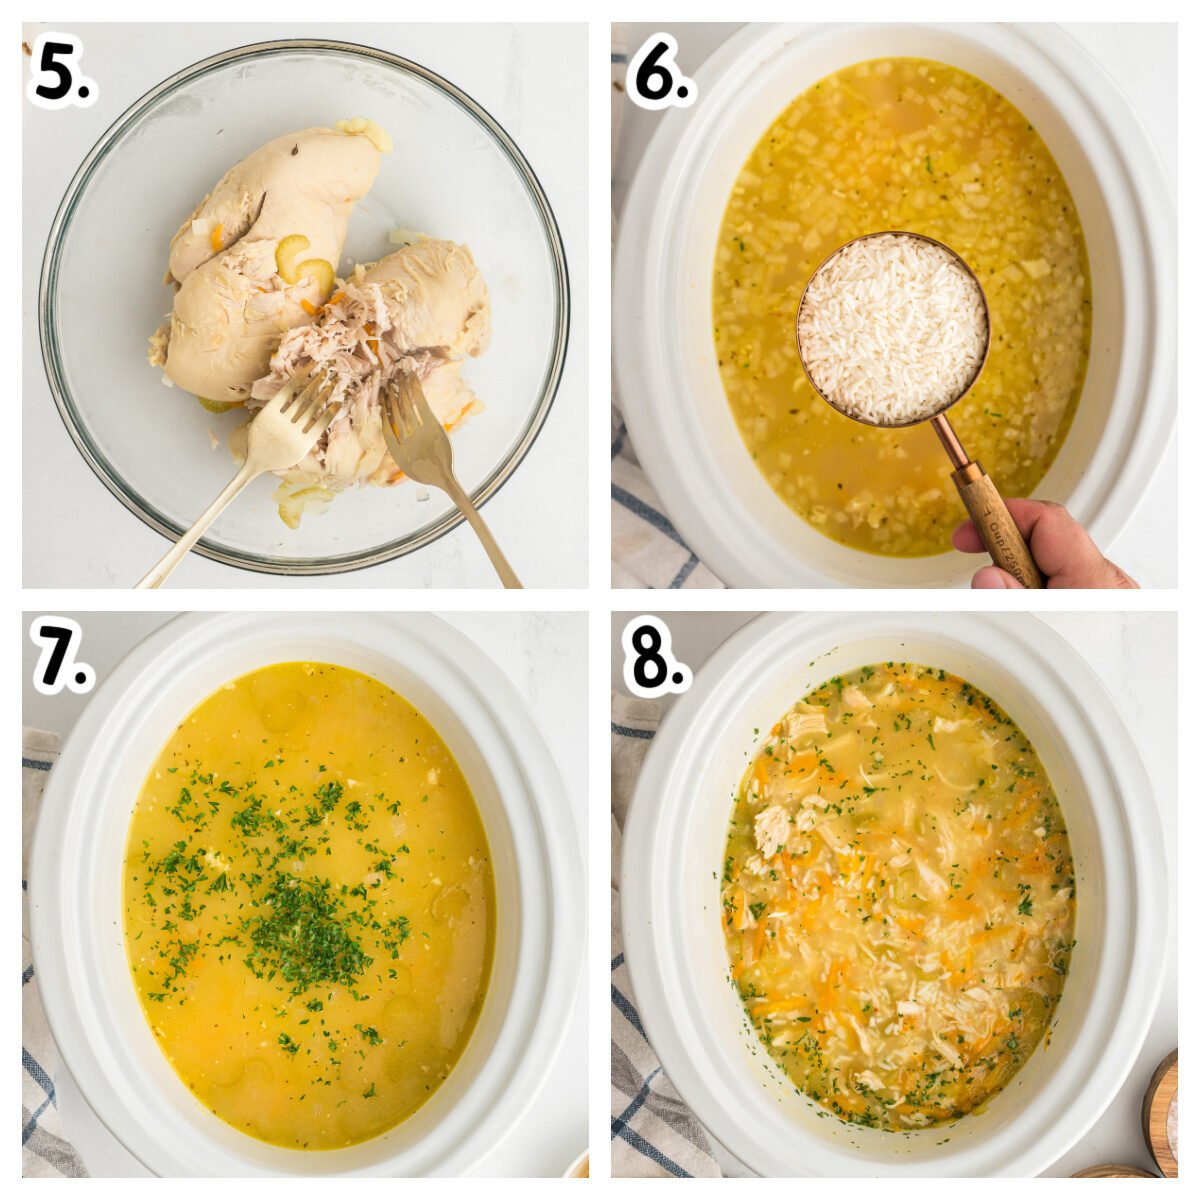 Four image showing how to shred chicken and add minute brand rice to soup.